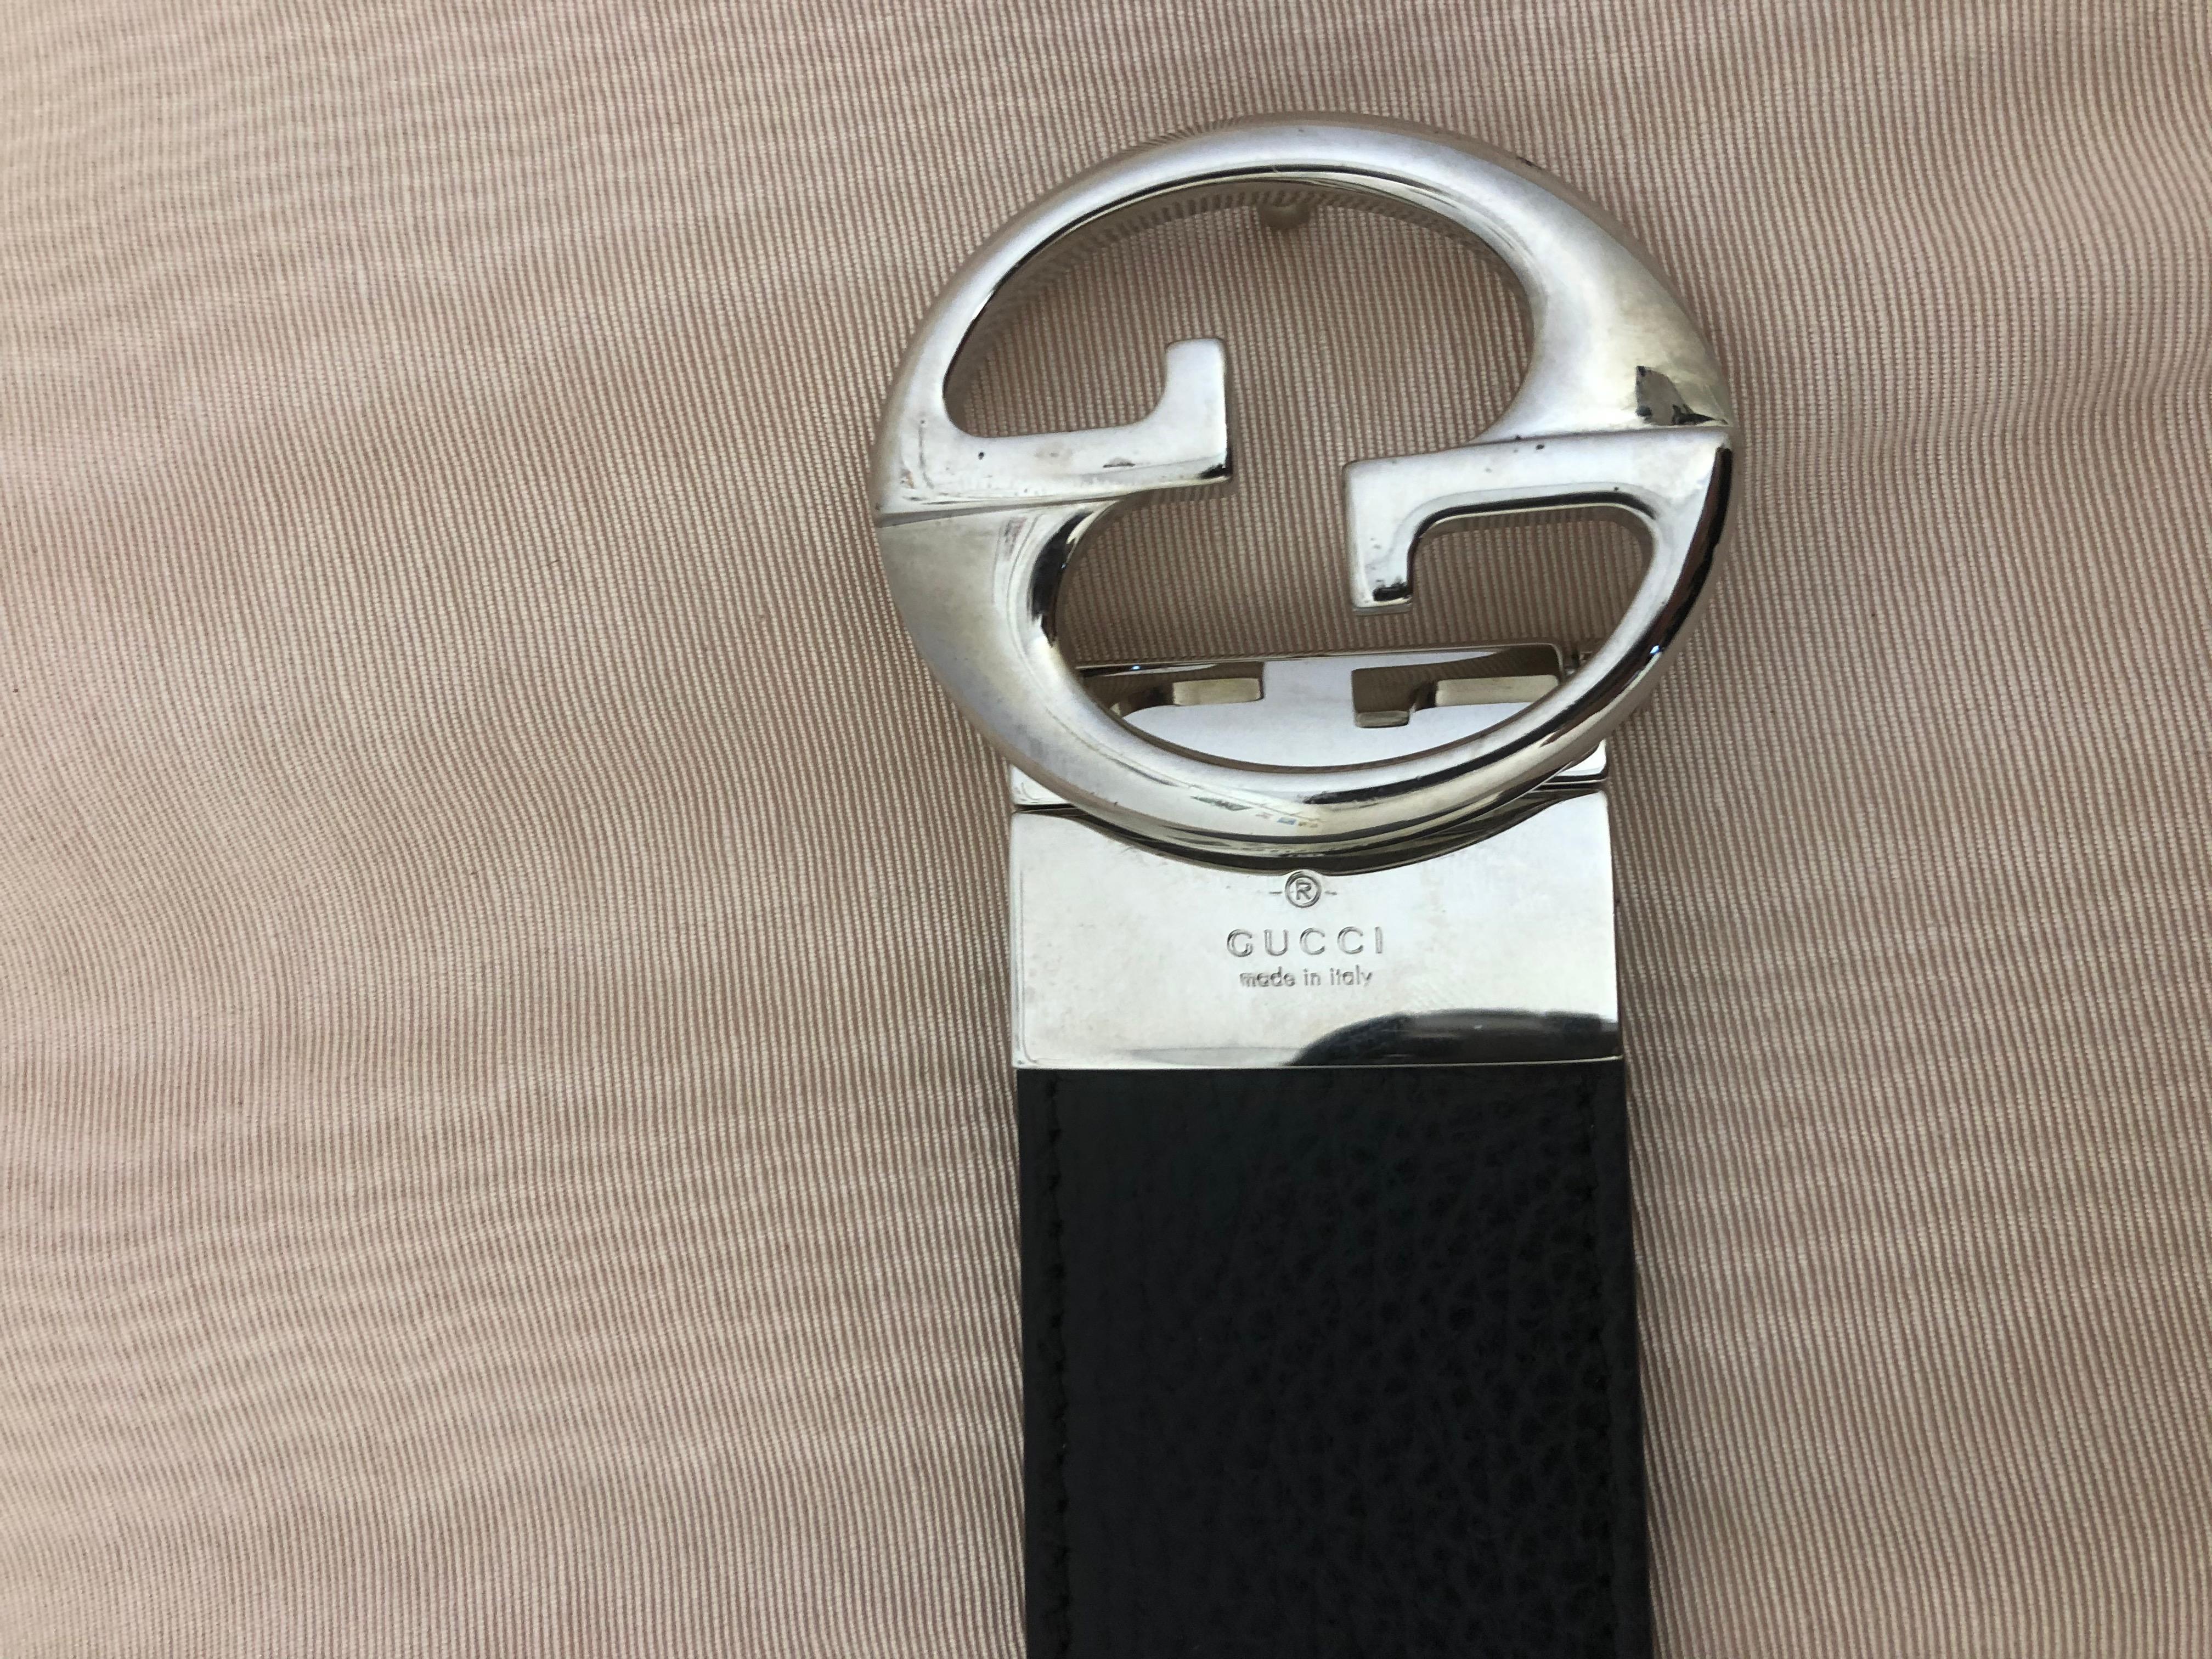 Magnificent, as new, 1980s Gucci reversible calf leather belt in black and navy. The leather is pebbled and features a silver interlocking GG logo, and two loops. The length has been measured excluding the buckle and silver plate.

This belt can be